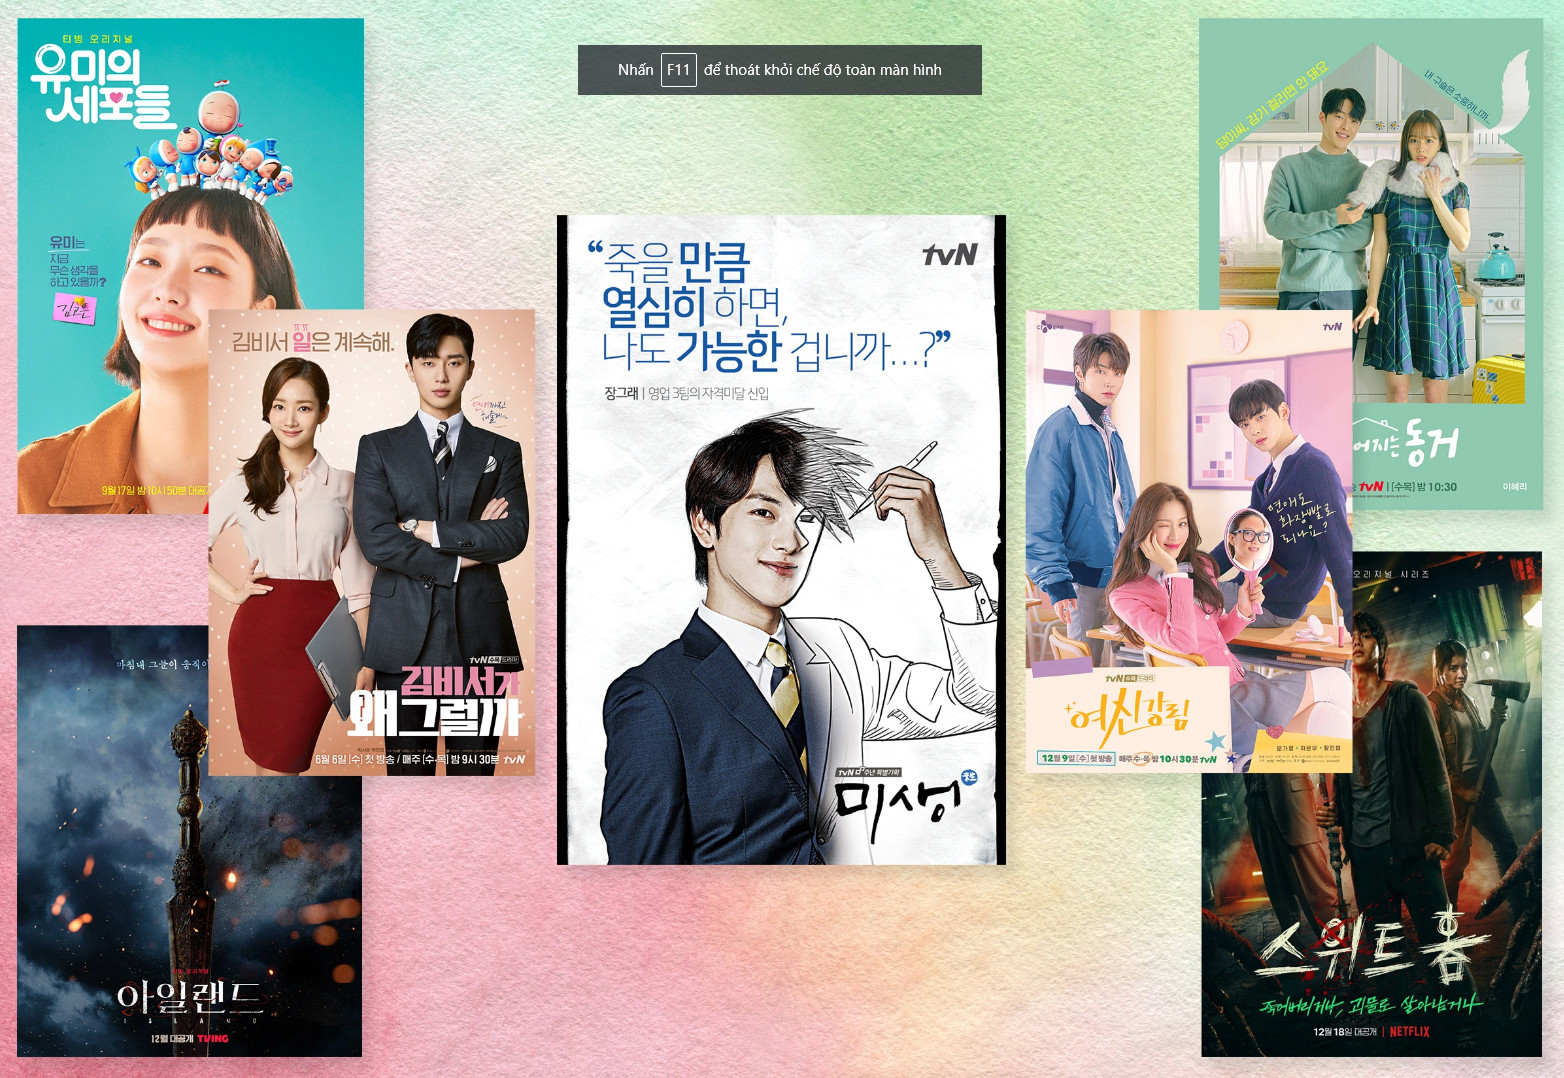 Why So Many Of Your Favorite K-Dramas Are Based on Webtoons